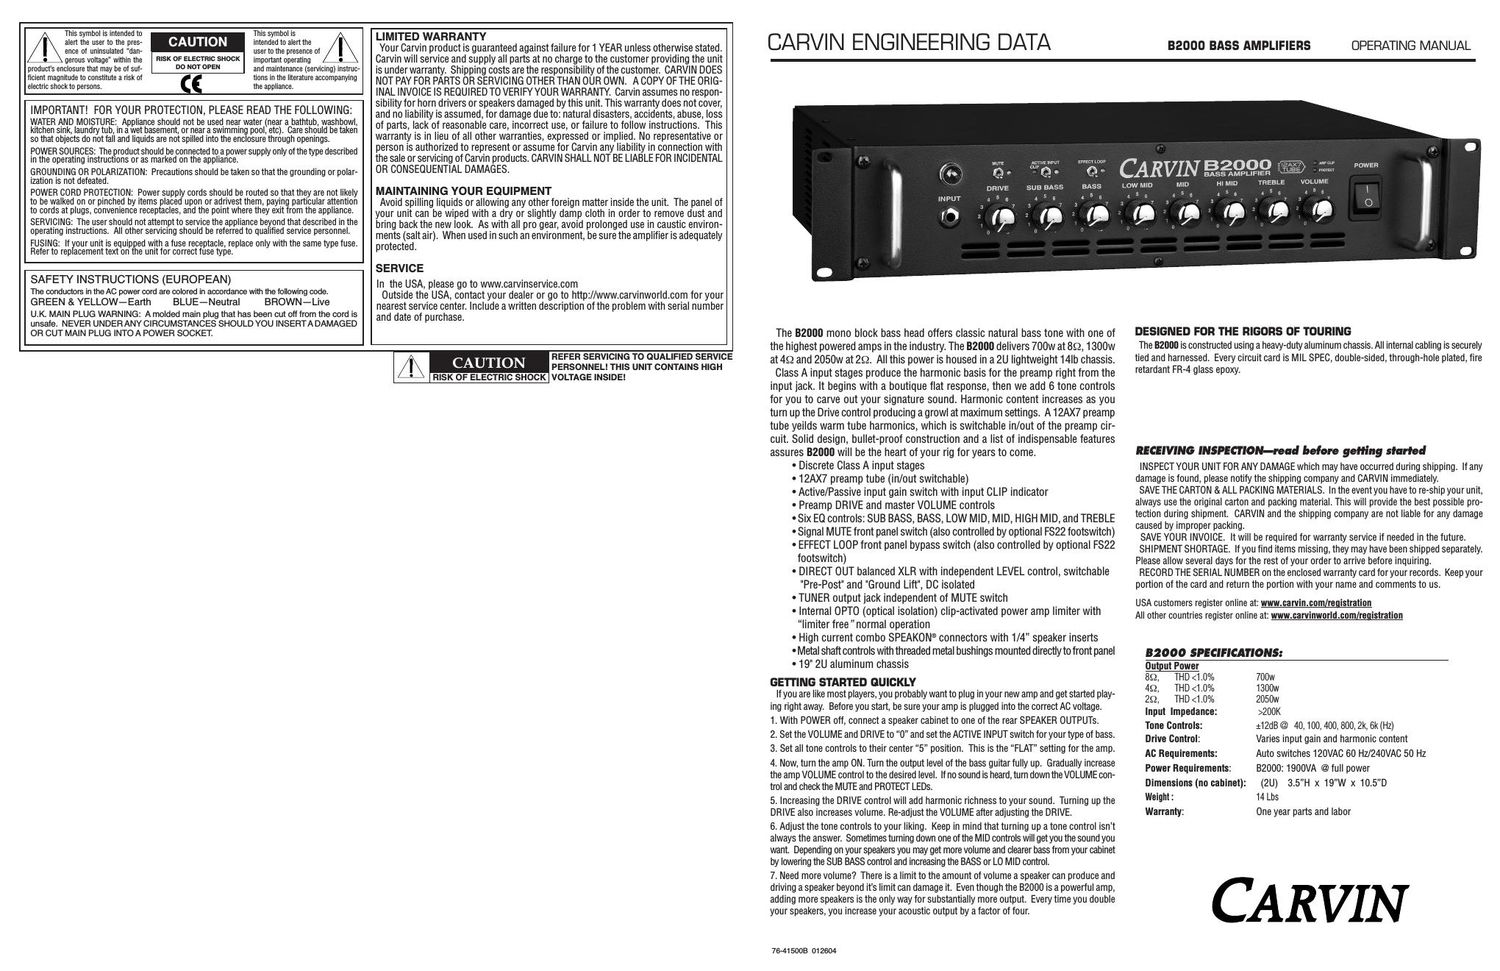 carvin b 2000 owners manual